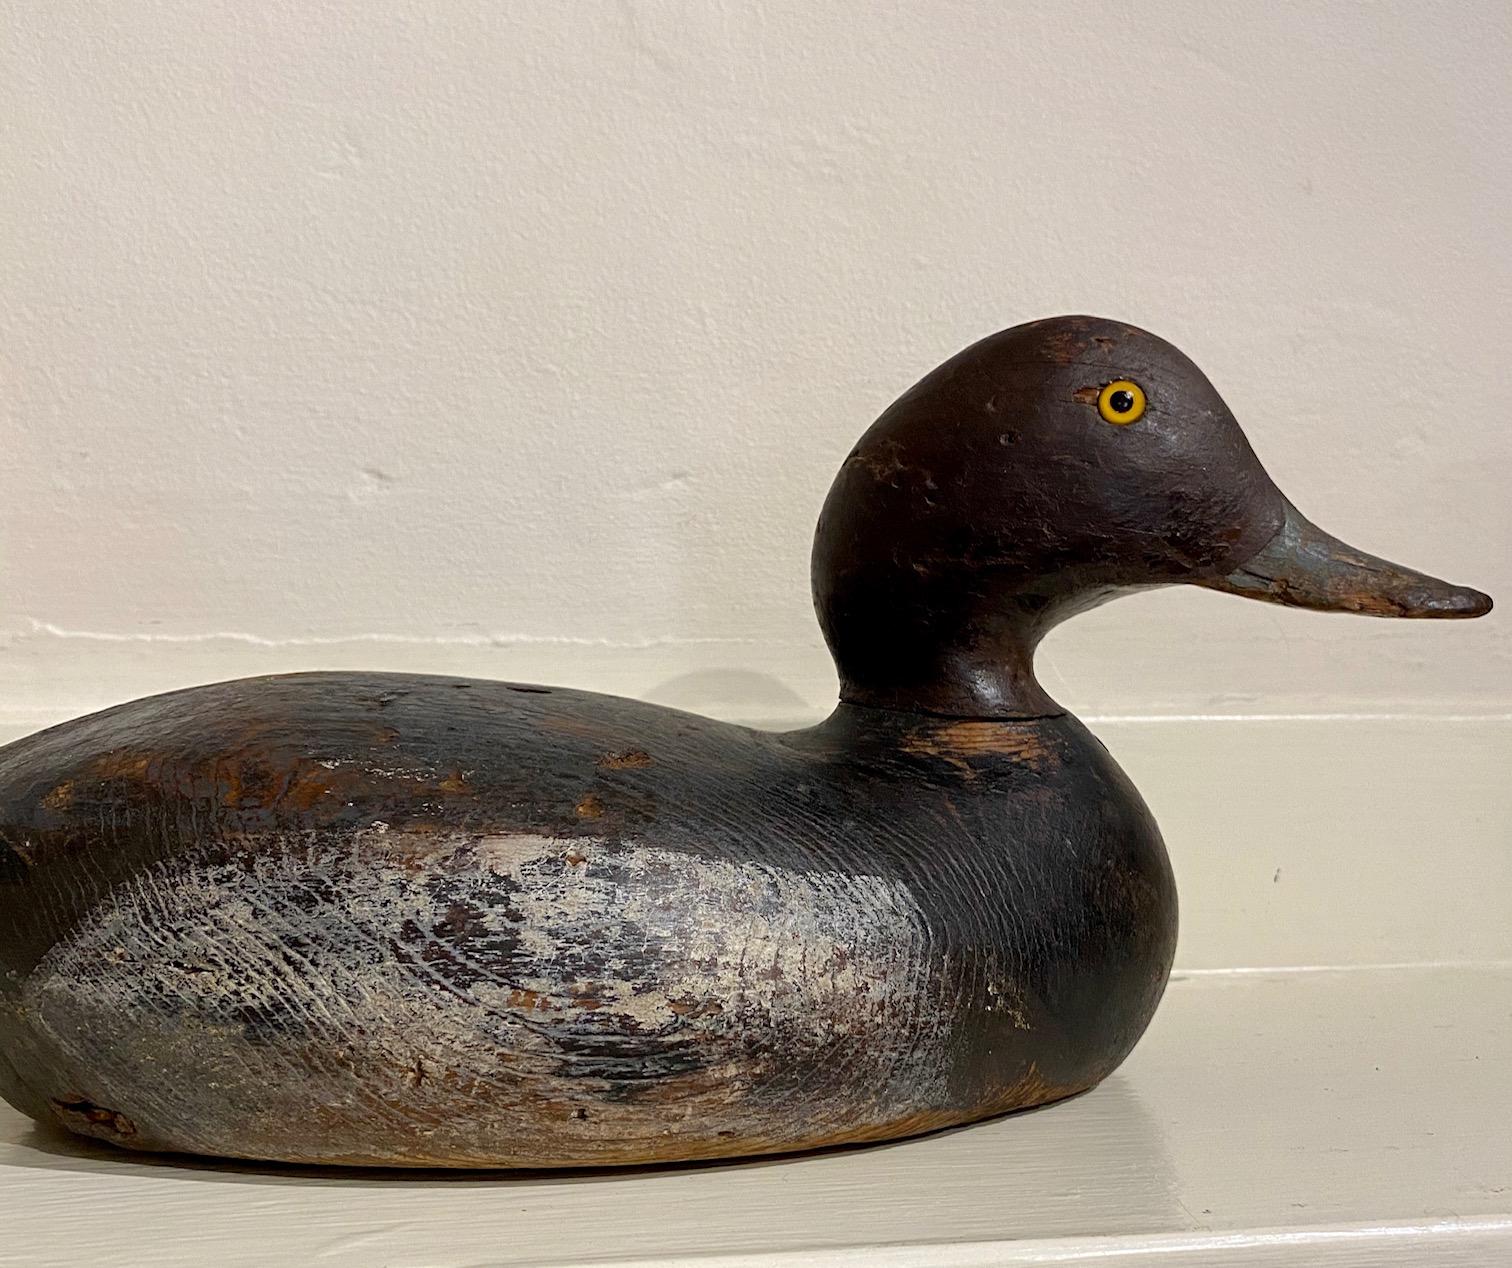 Antique Martha's Vineyard Goldeneye Hen Decoy by Frank Richardson, from Anthier's Pond in Edgartown (now called Sengekontacket Pond), circa 1910-1920, having a carved head with glass eyes, mounted on hollow carved body with 